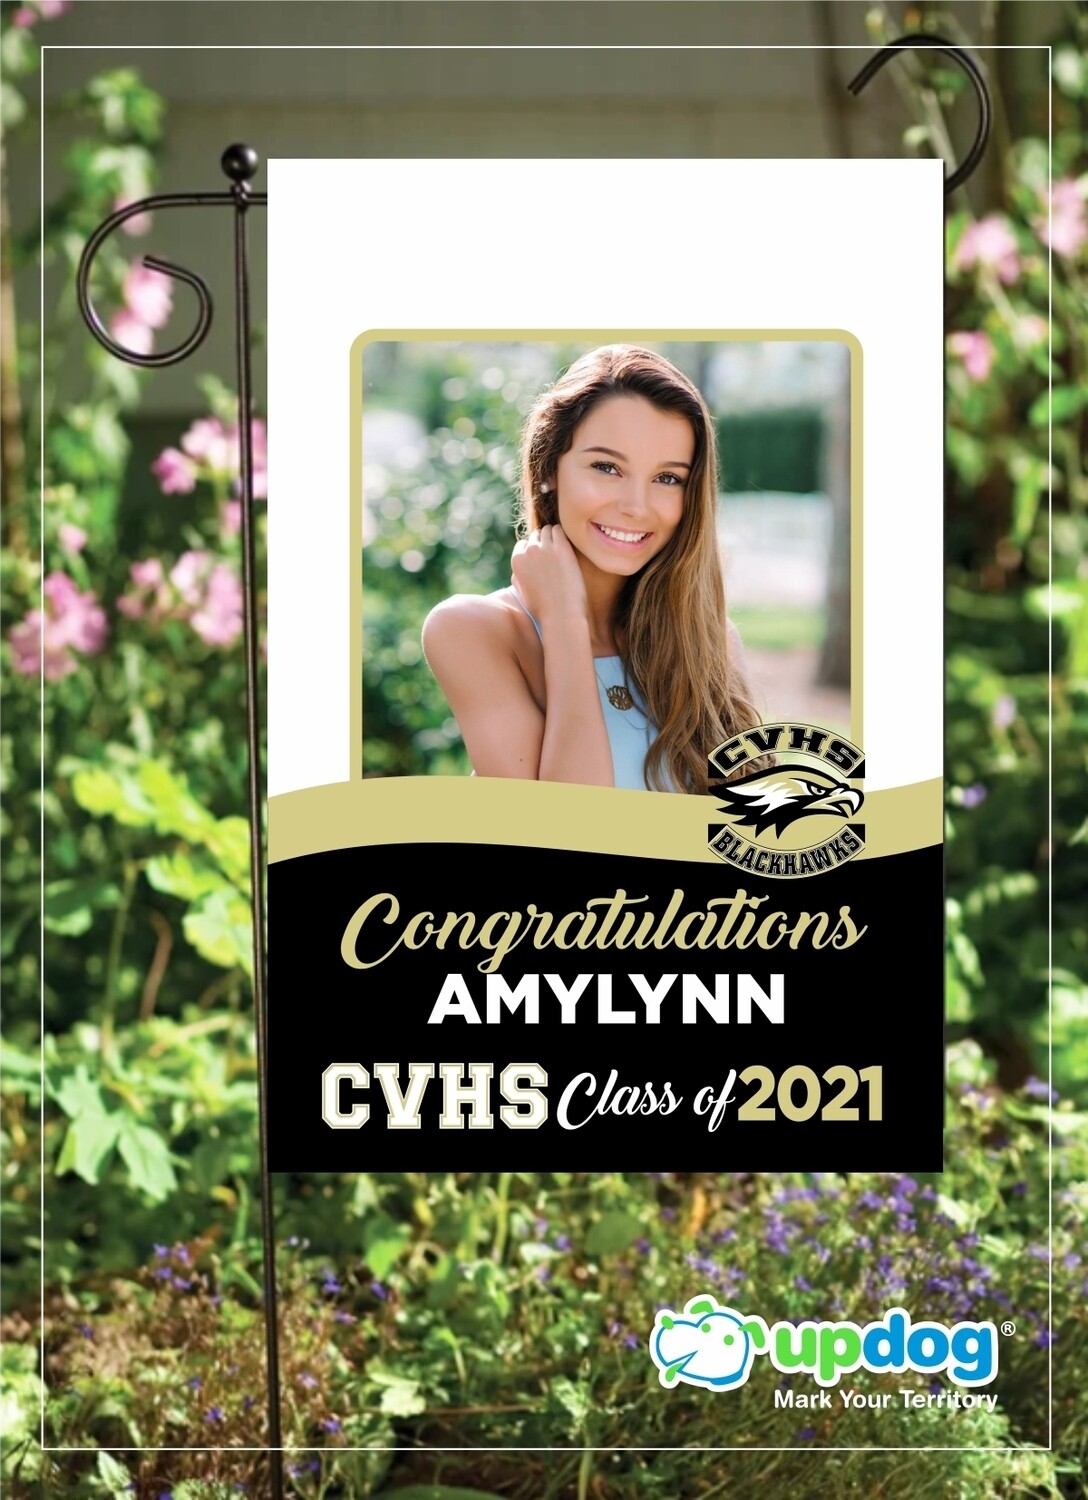 Citrus Valley High School - Personalized Photo and Name, Class of 2021 Senior Graduation Garden Flag, Class of 2021 Garden Flag, Congratulations Garden Flag